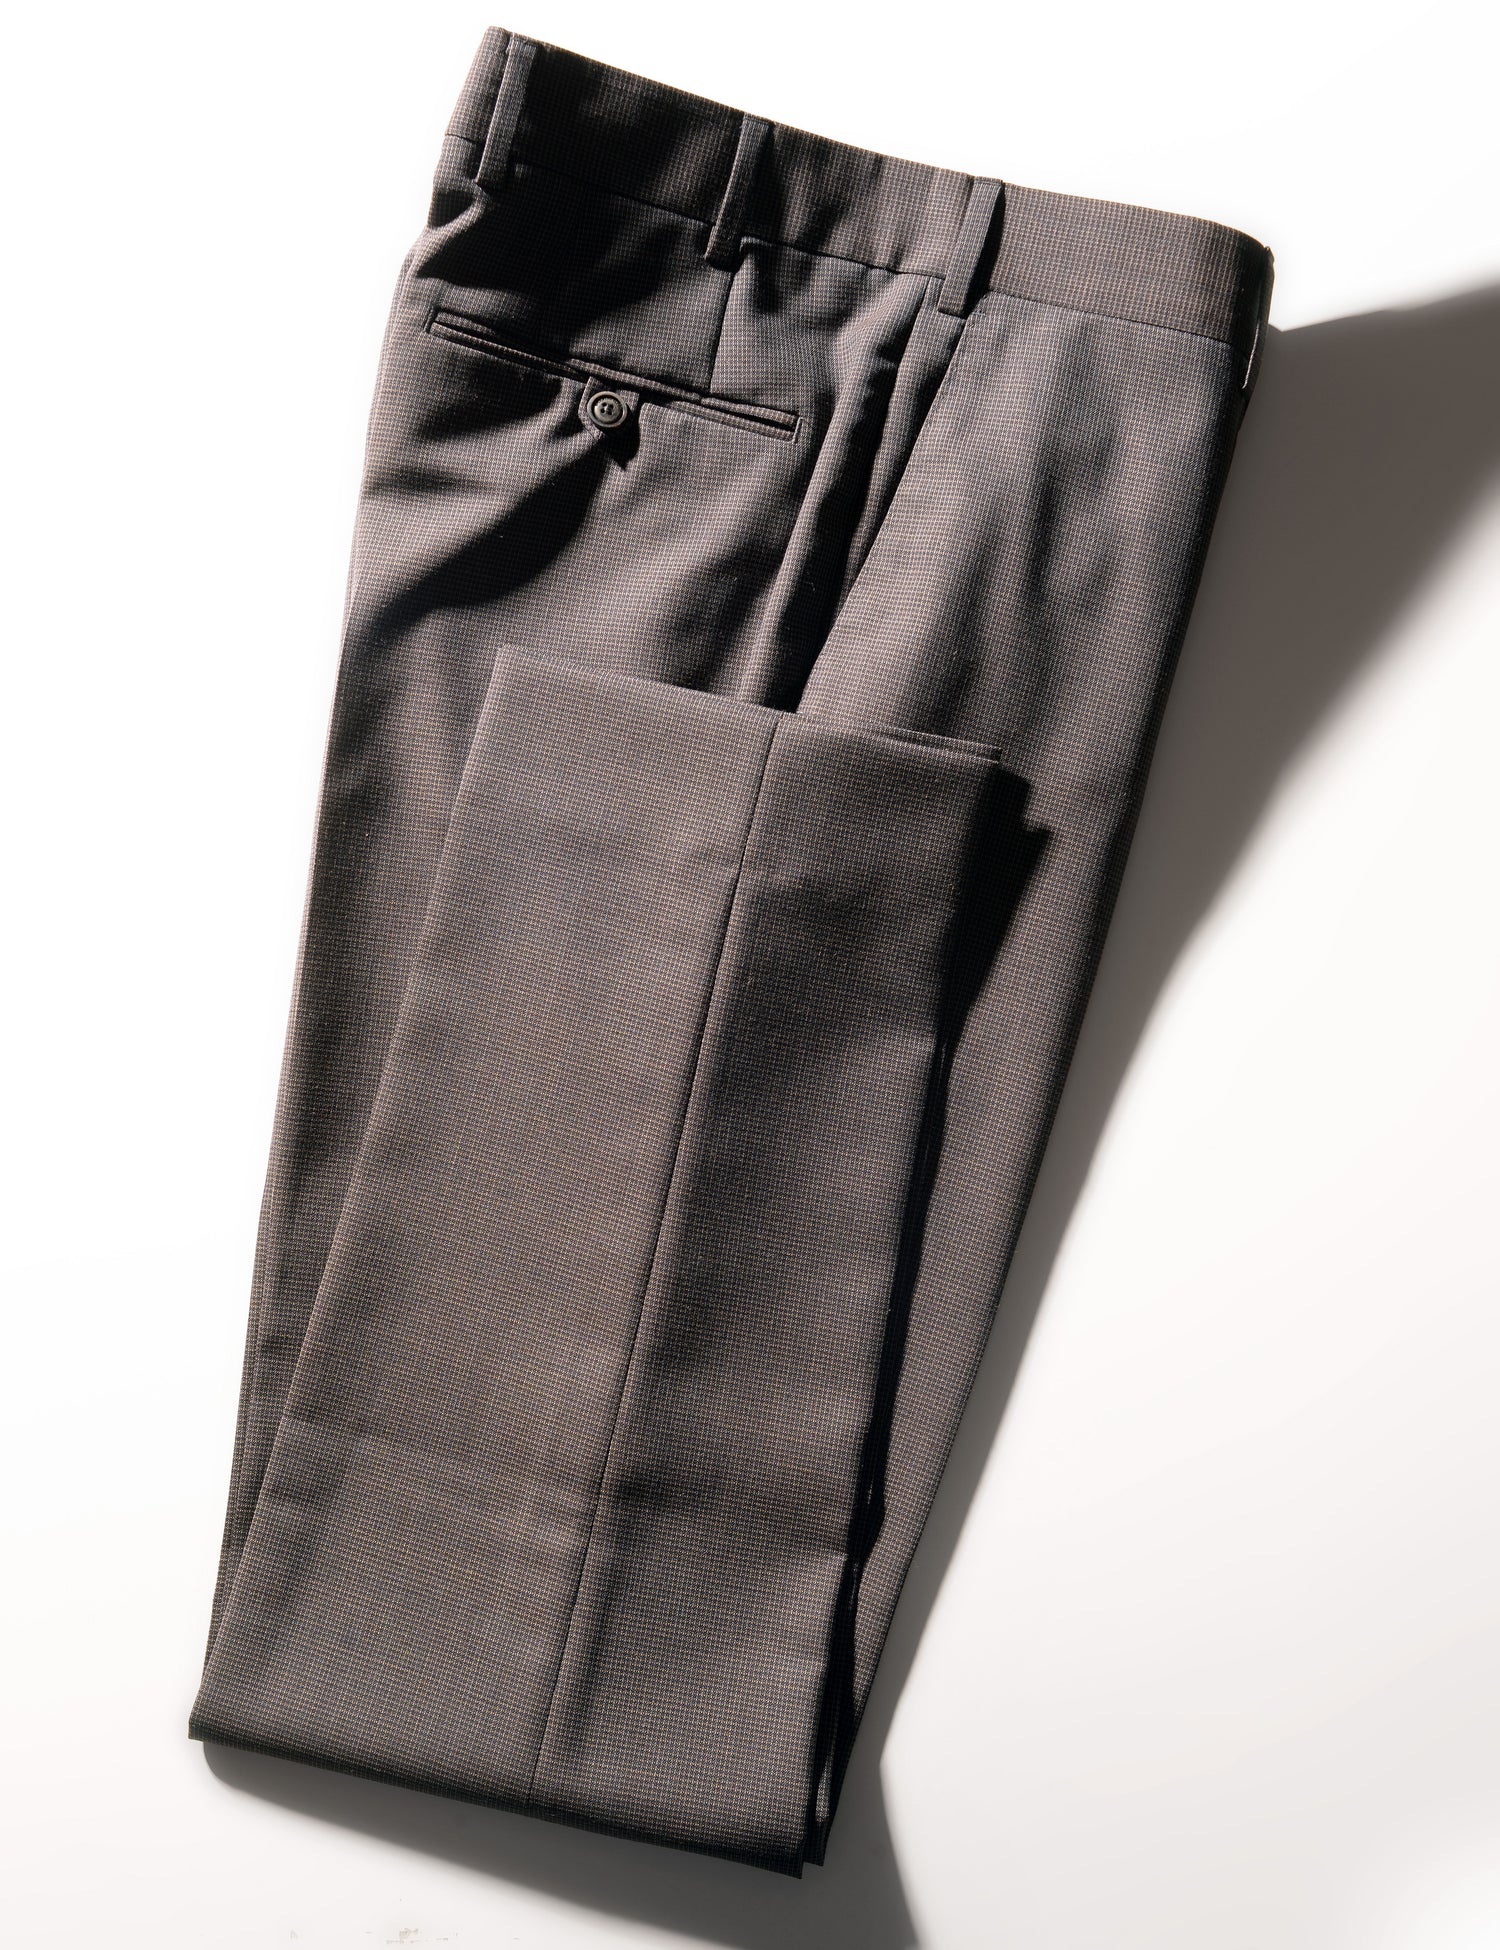 Folded shot of BKT50 Tailored Trousers in Wool Grid Weave - Iron Oxide showing hem, back pocket, and waistband